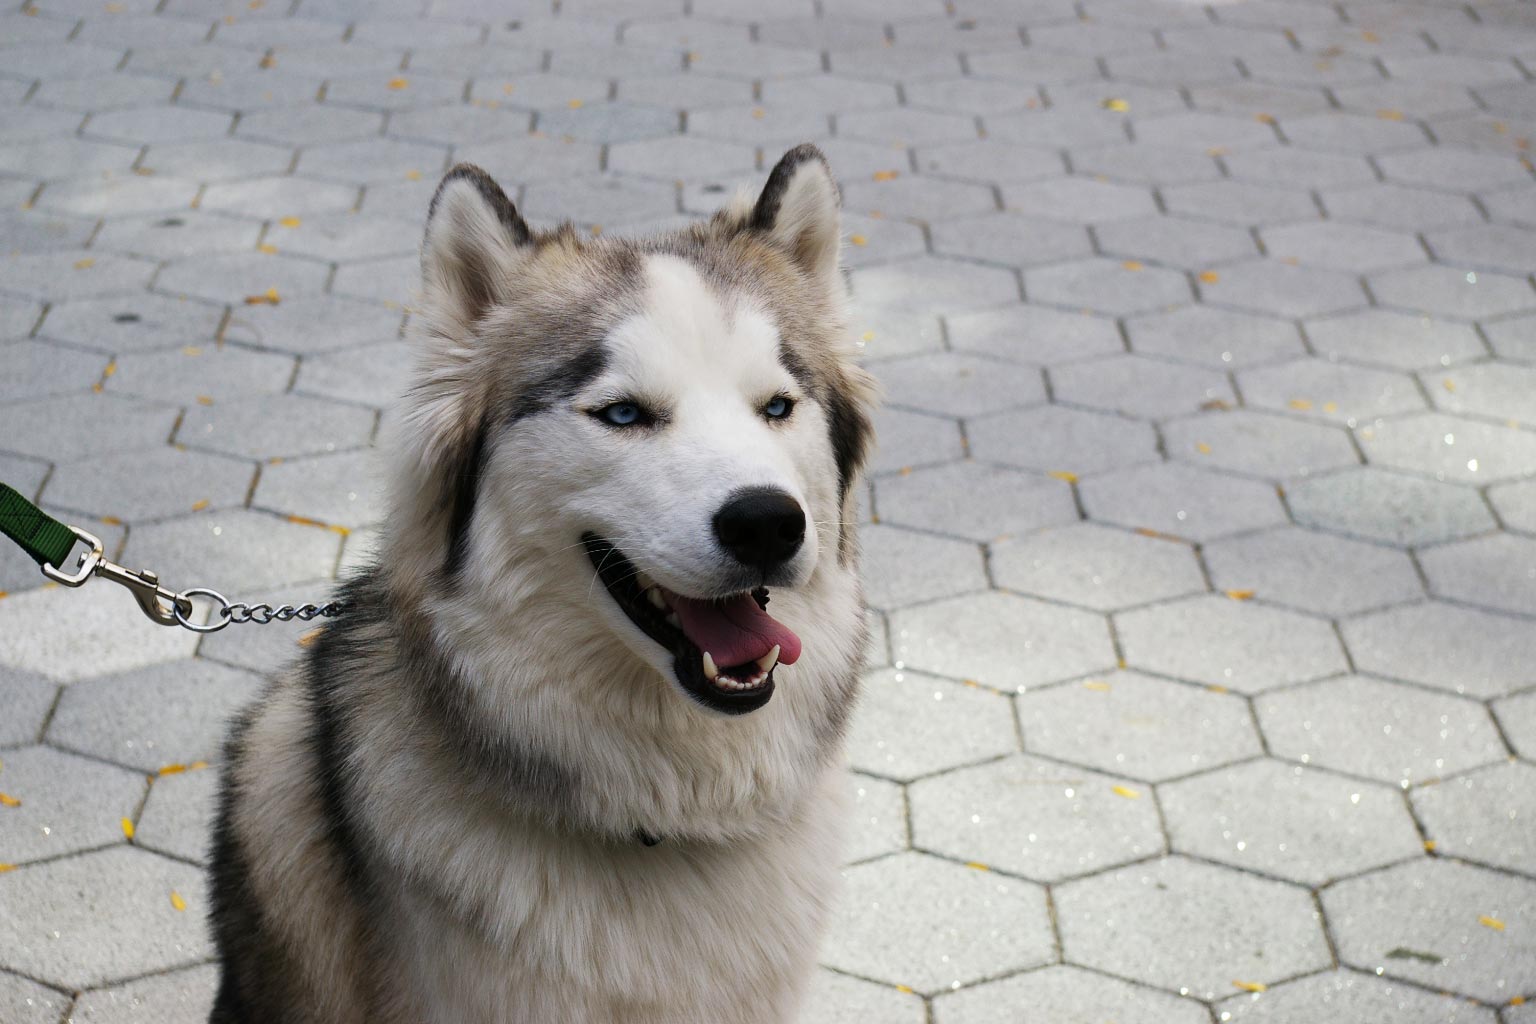 Private dog walking services in New York